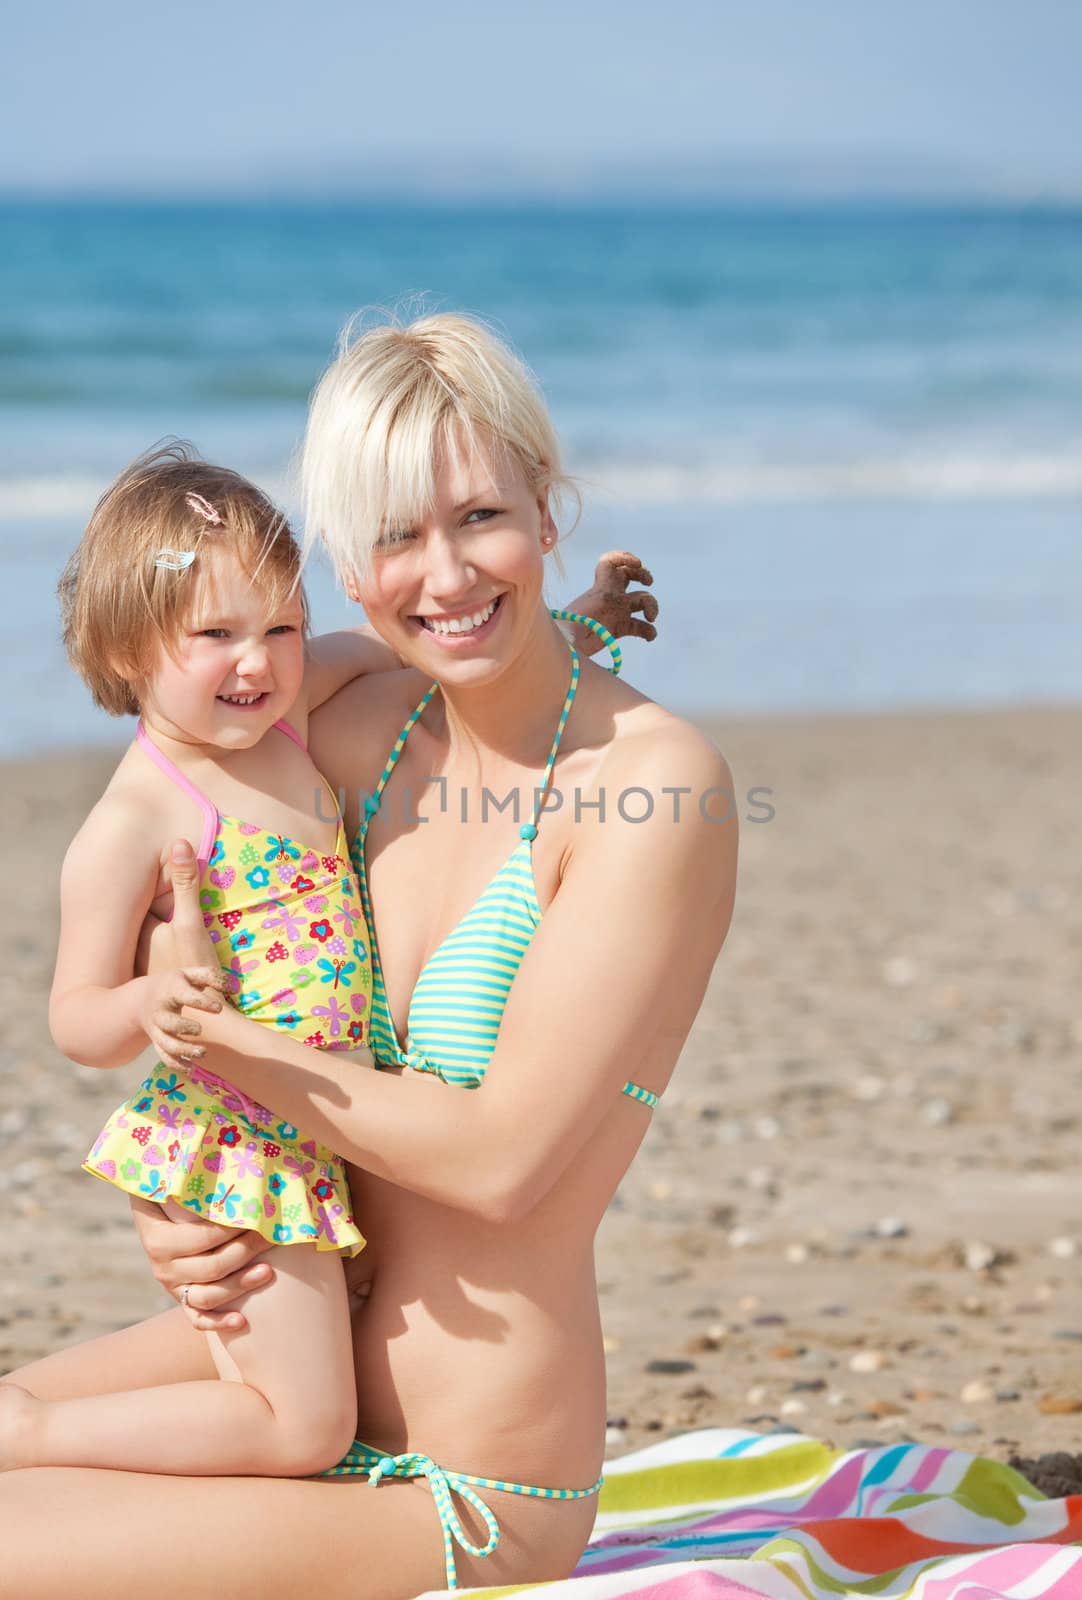 A smiling mother with her daughter at the beach 